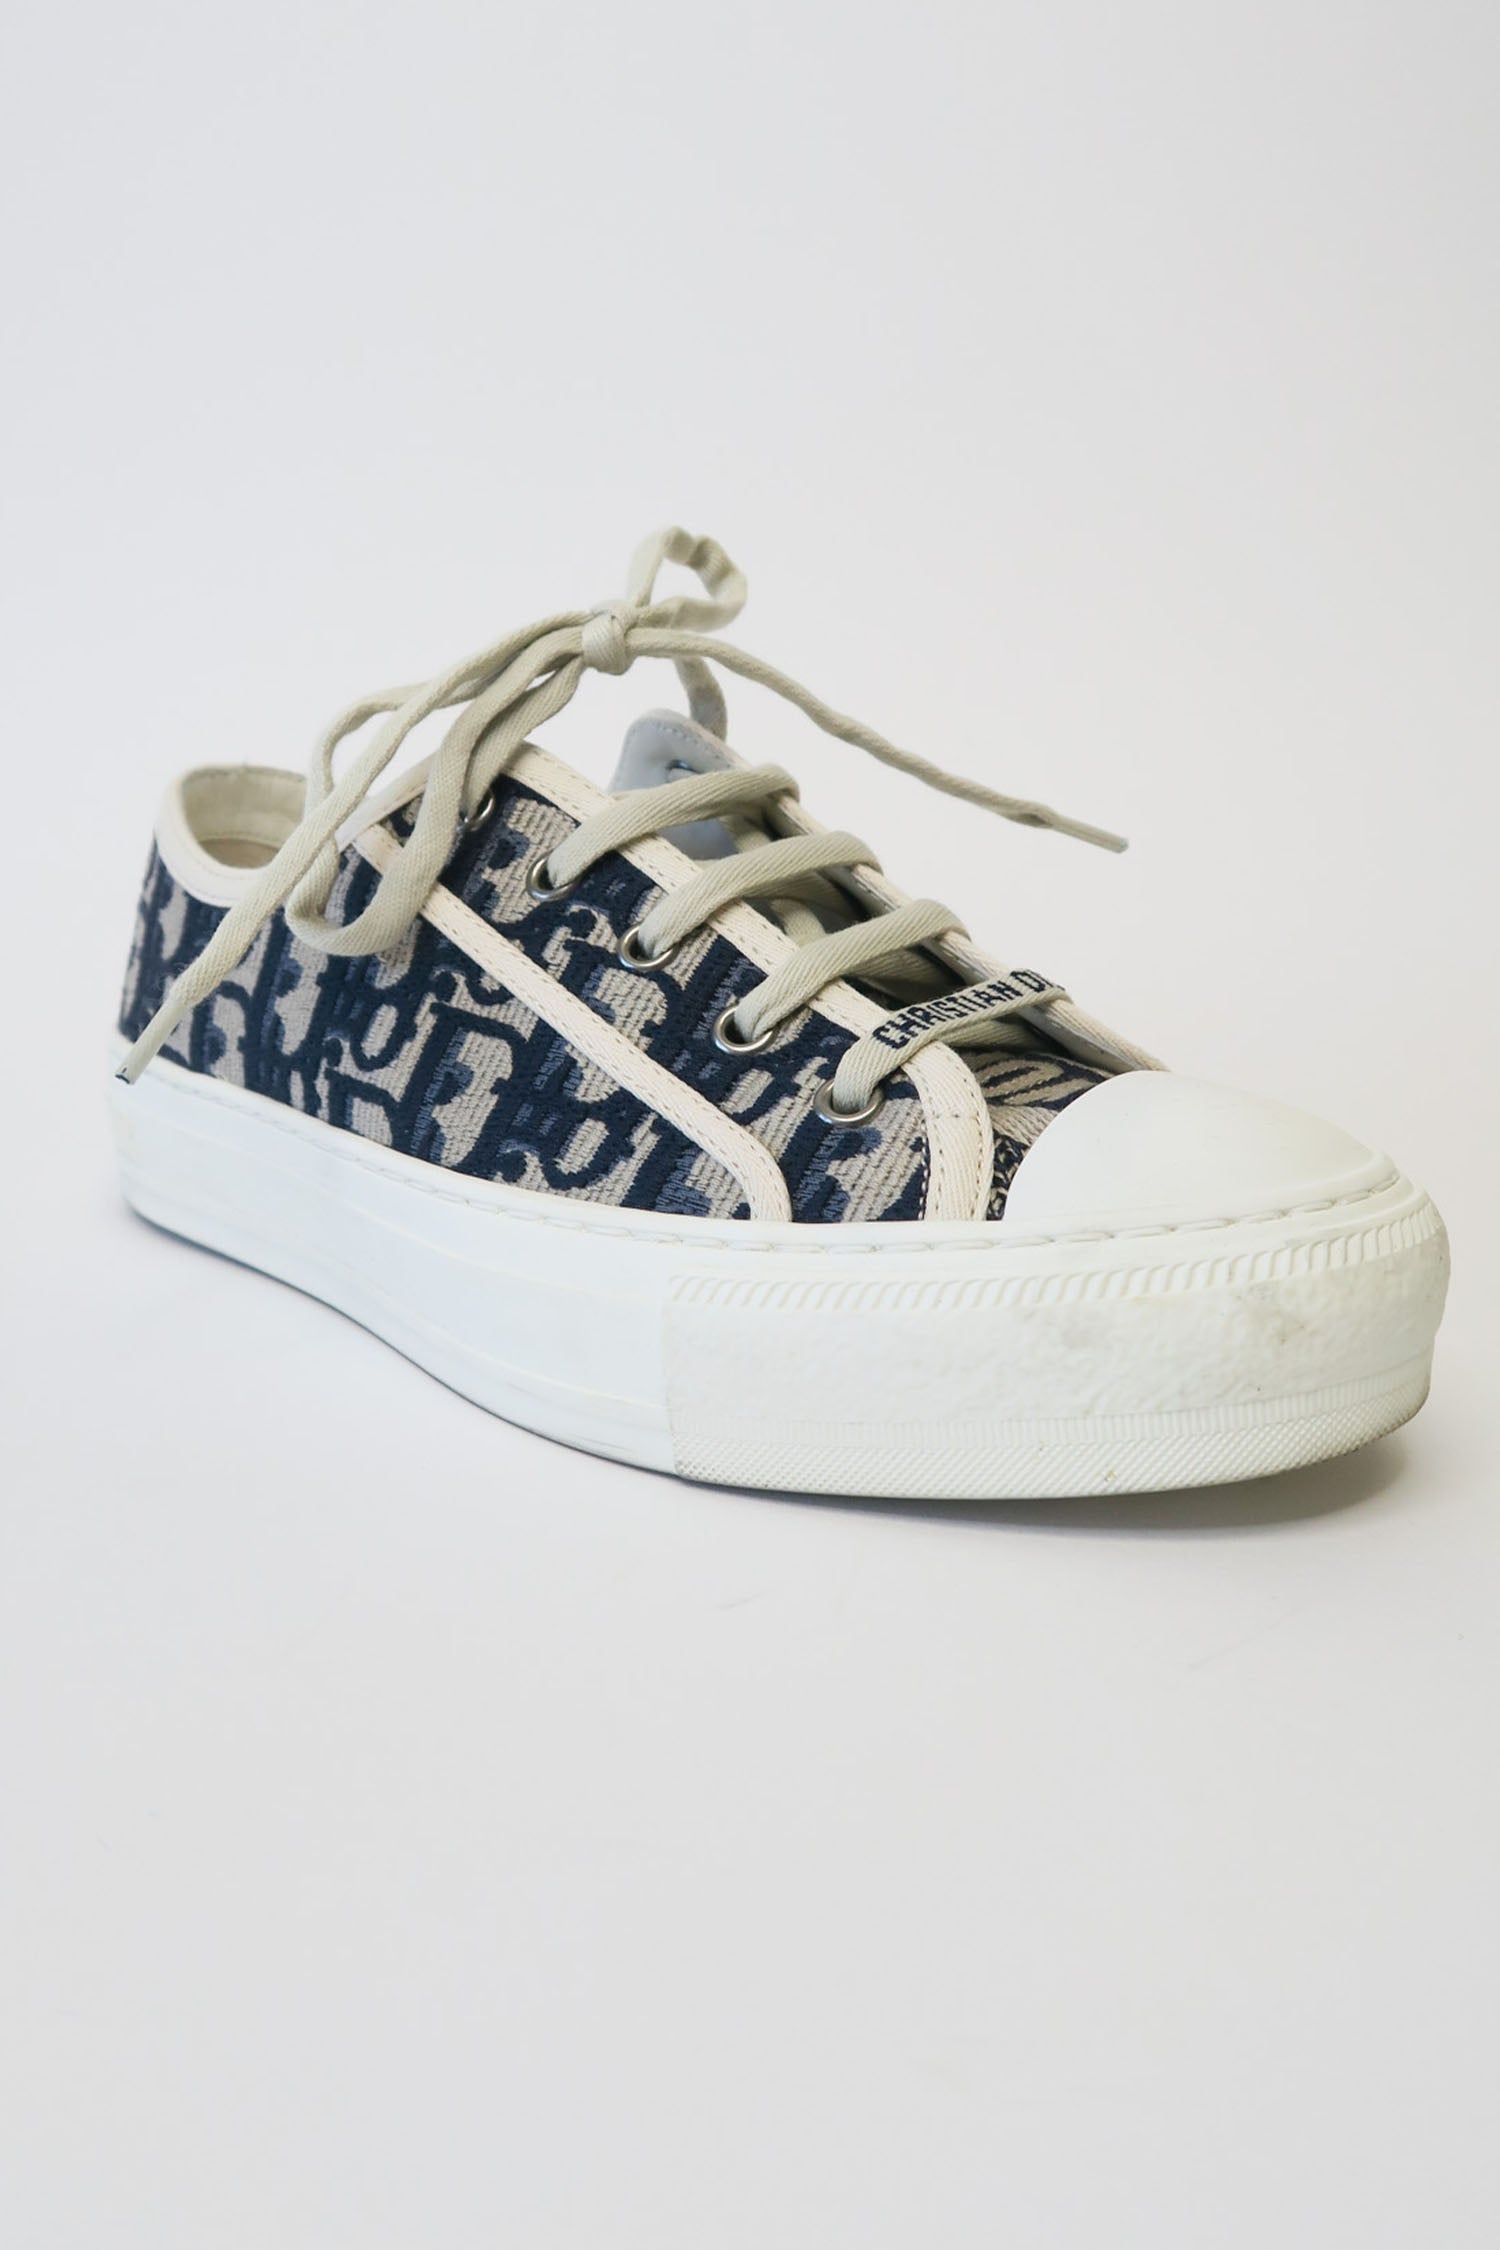 Christian Dior Canvas Printed Sneakers sz 37.5